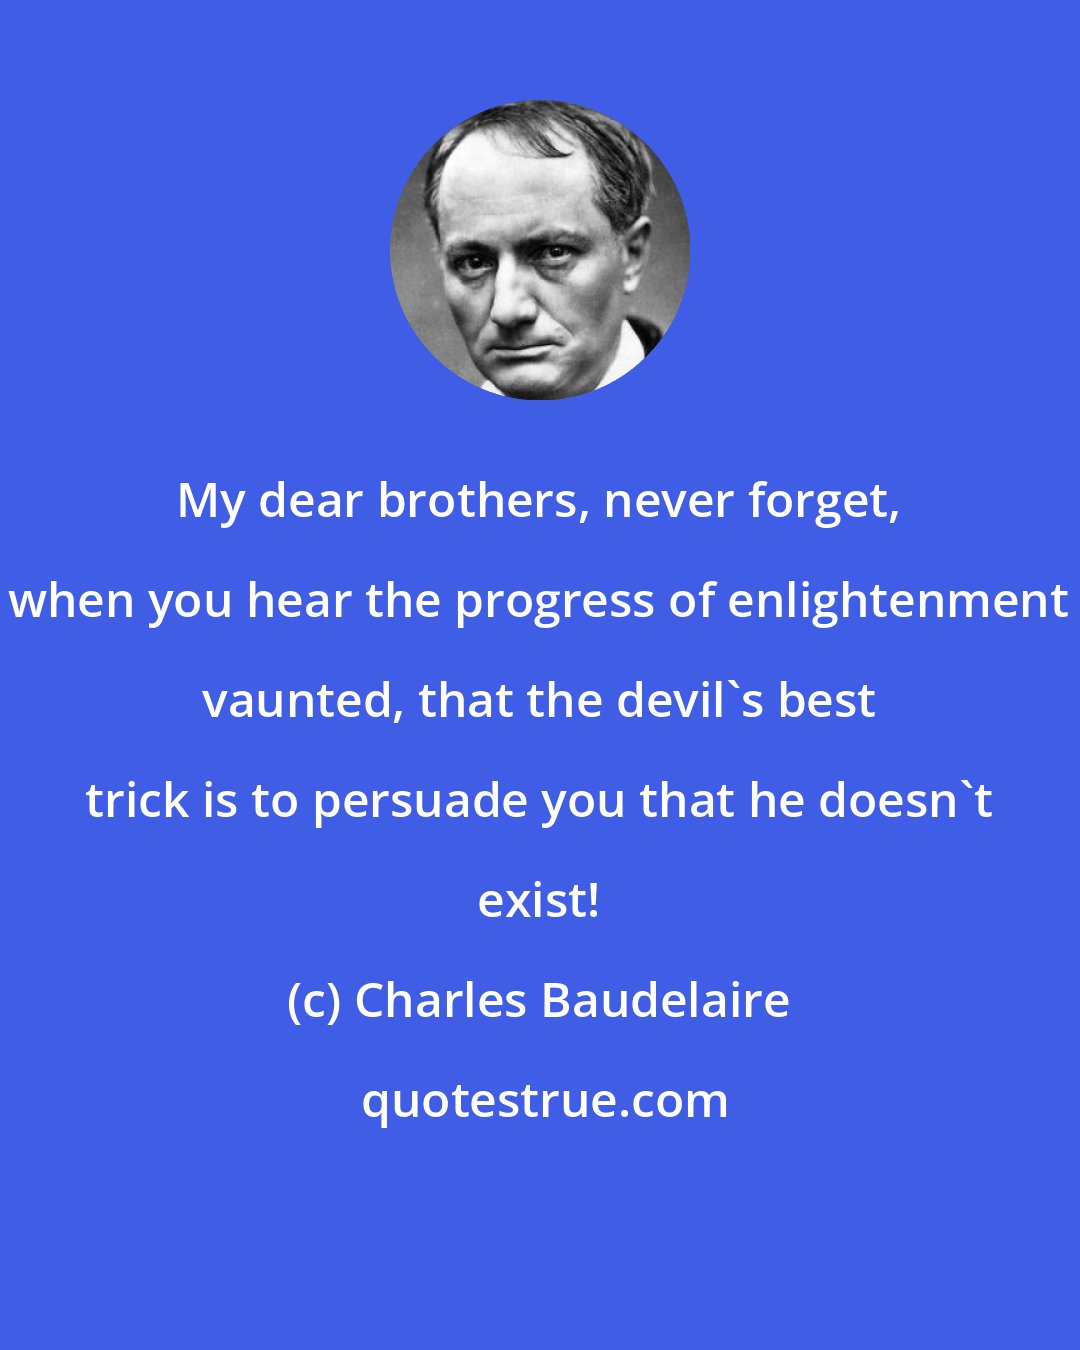 Charles Baudelaire: My dear brothers, never forget, when you hear the progress of enlightenment vaunted, that the devil's best trick is to persuade you that he doesn't exist!